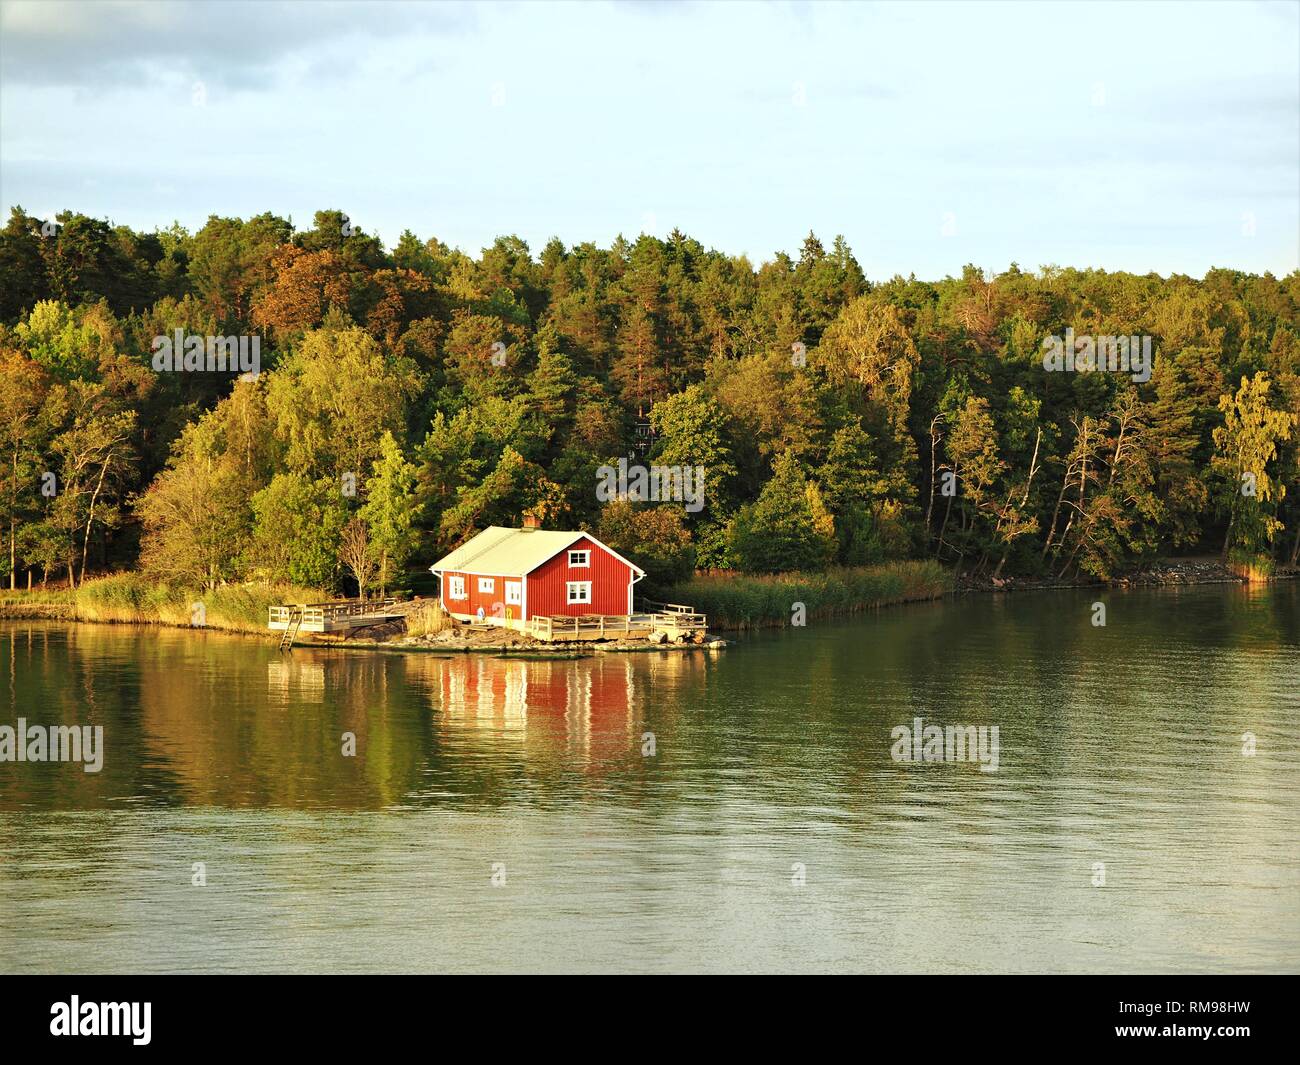 Cabin on the coast of a wooded island in the Turku Archipelago, Finland, in autumn Stock Photo